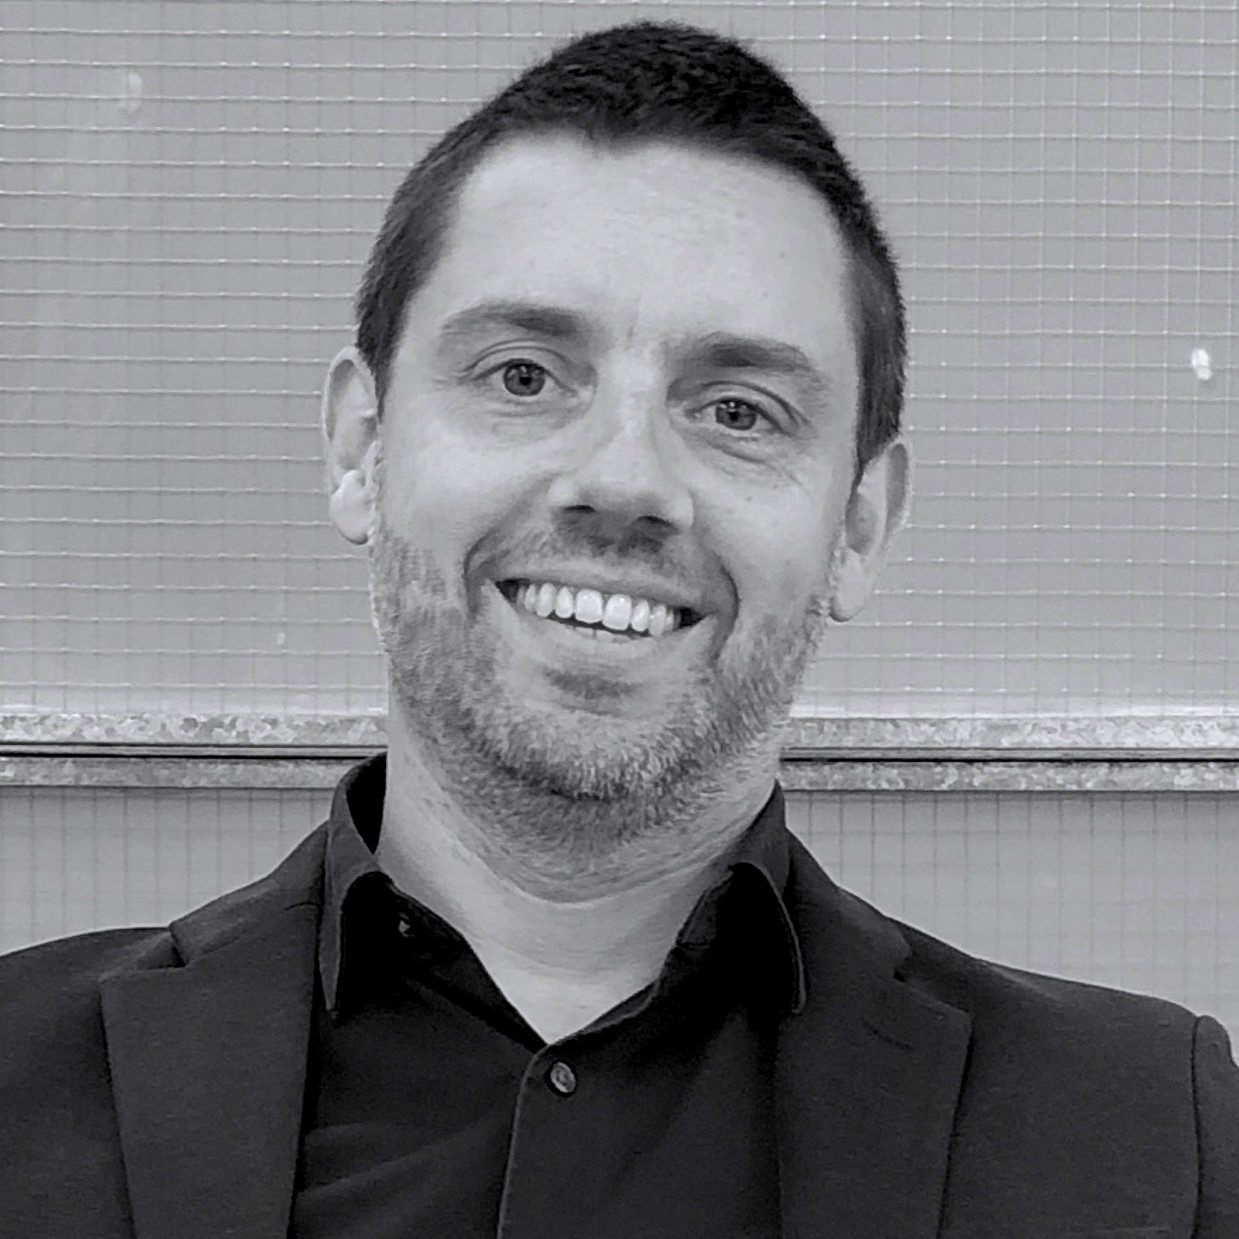 Humanscale appoints new A&D Director